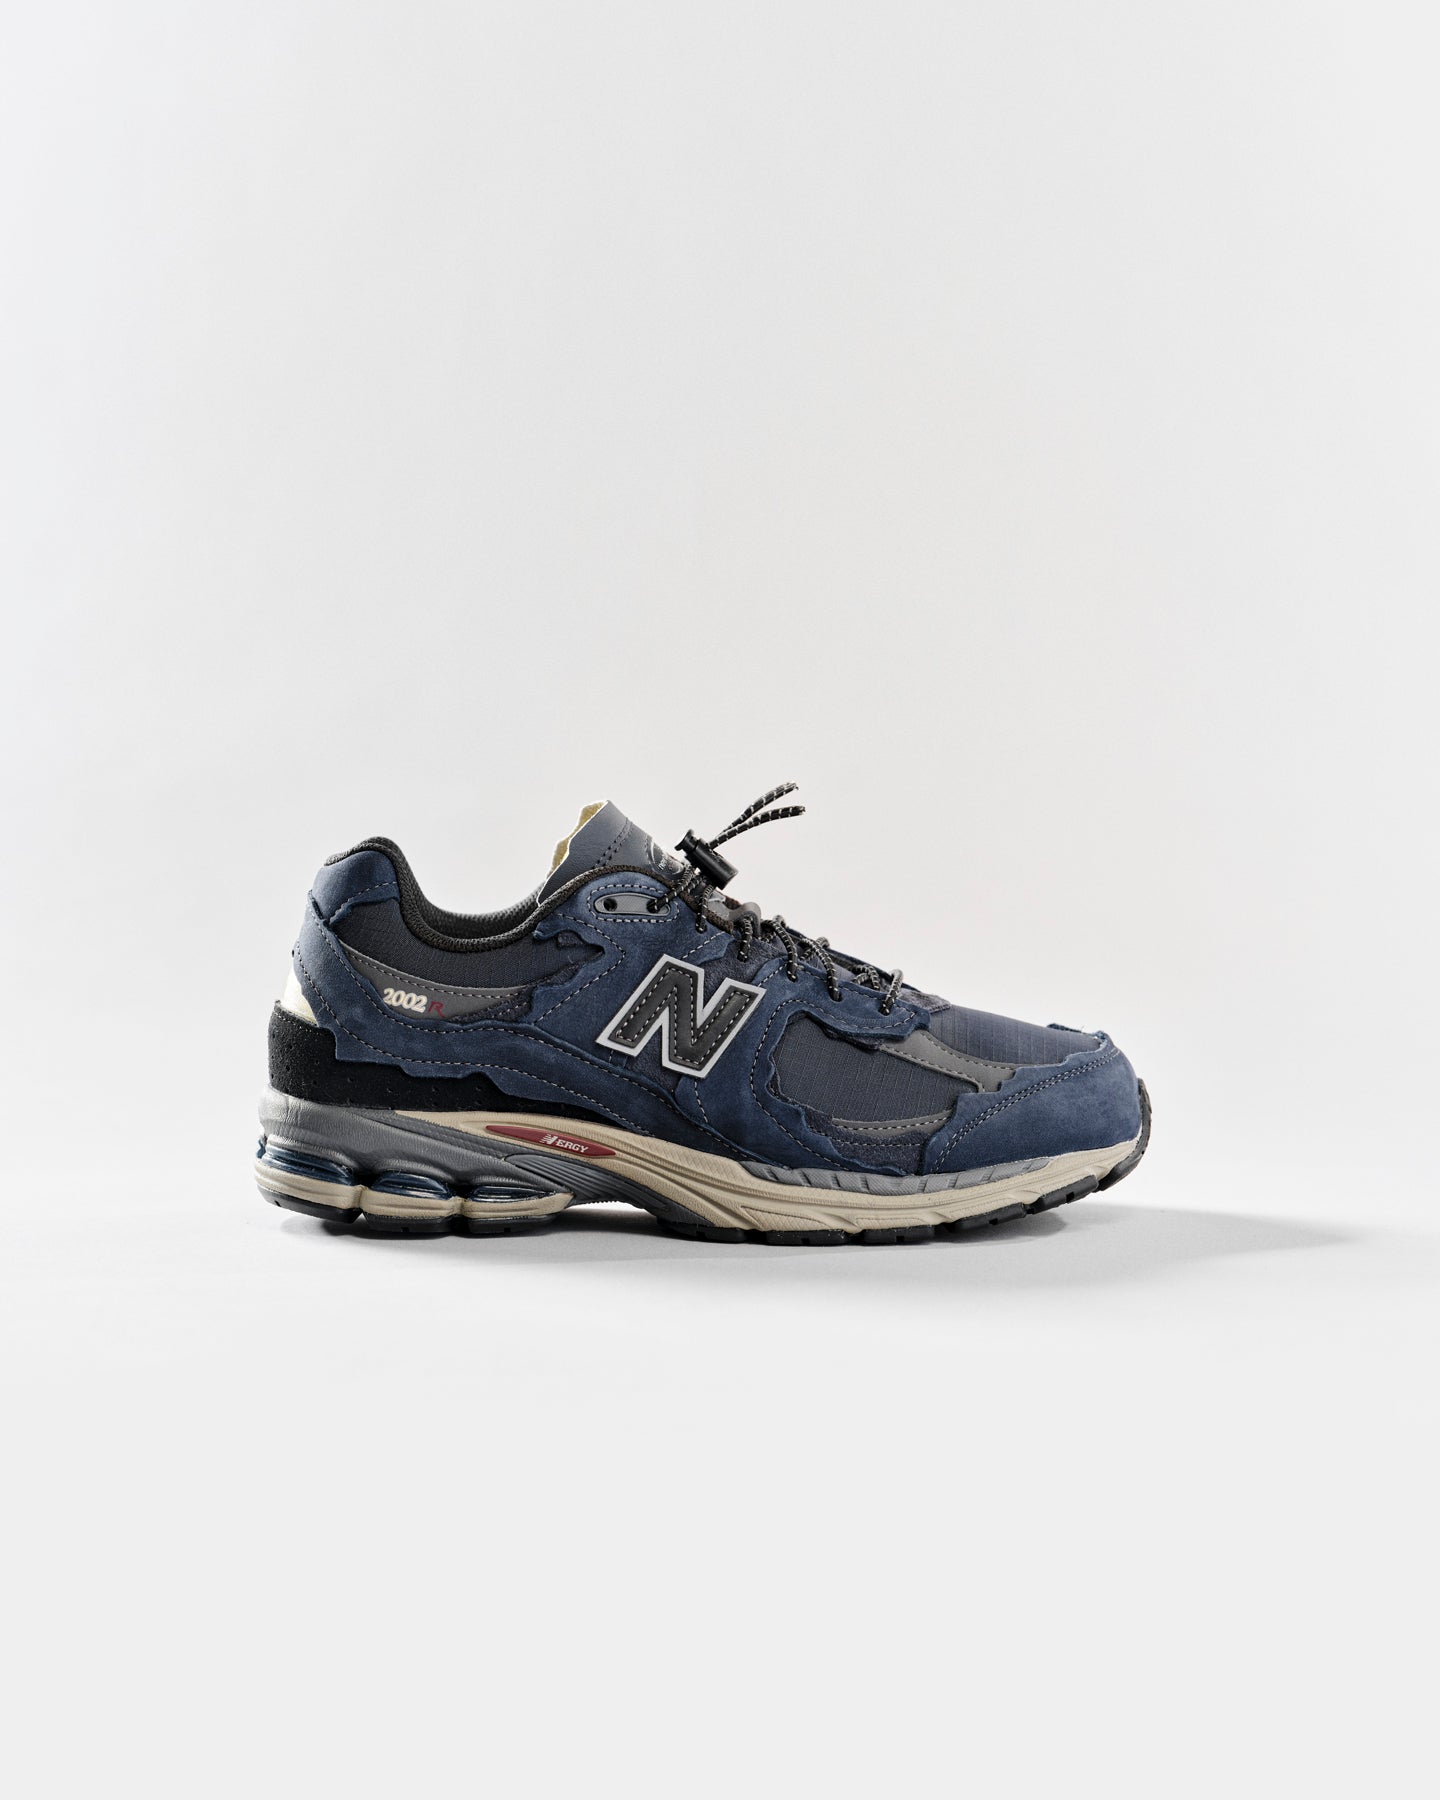 New Balance 2002R ‘Protection Pack’ Collection